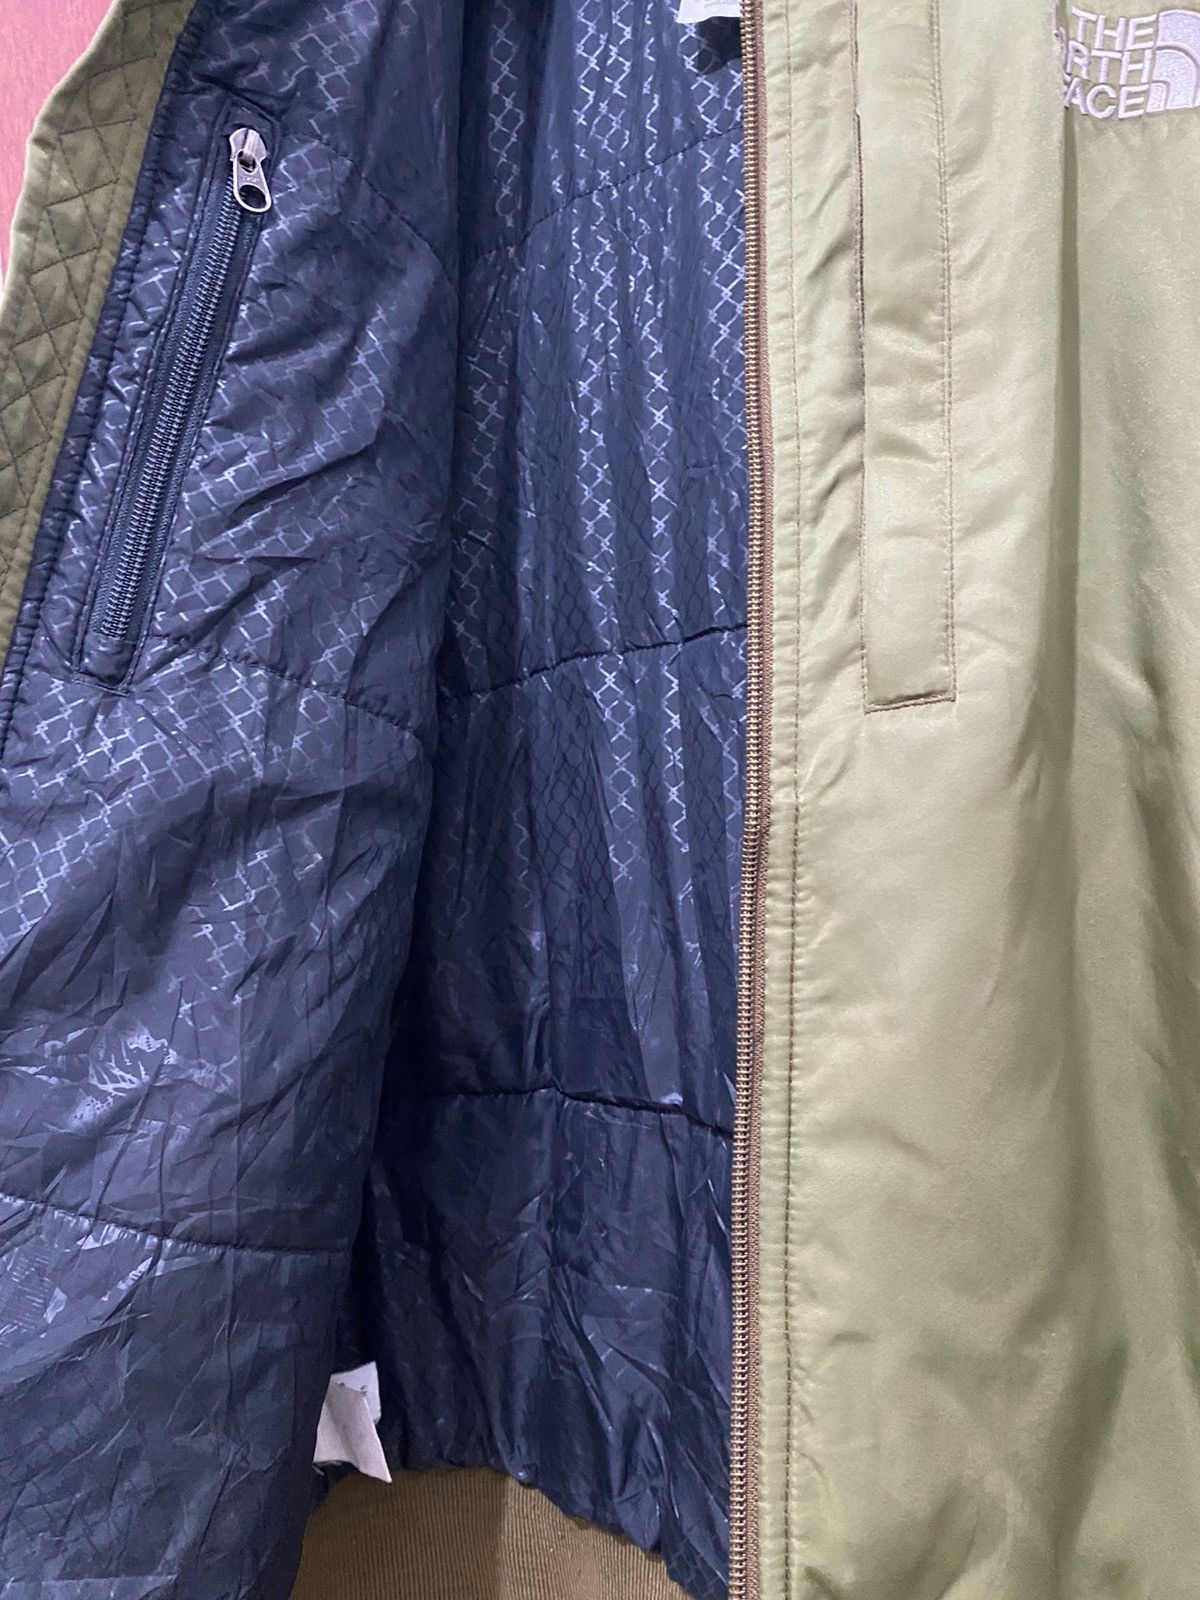 The North Face Ma-1 Jacket Design Military Olive Green - 6